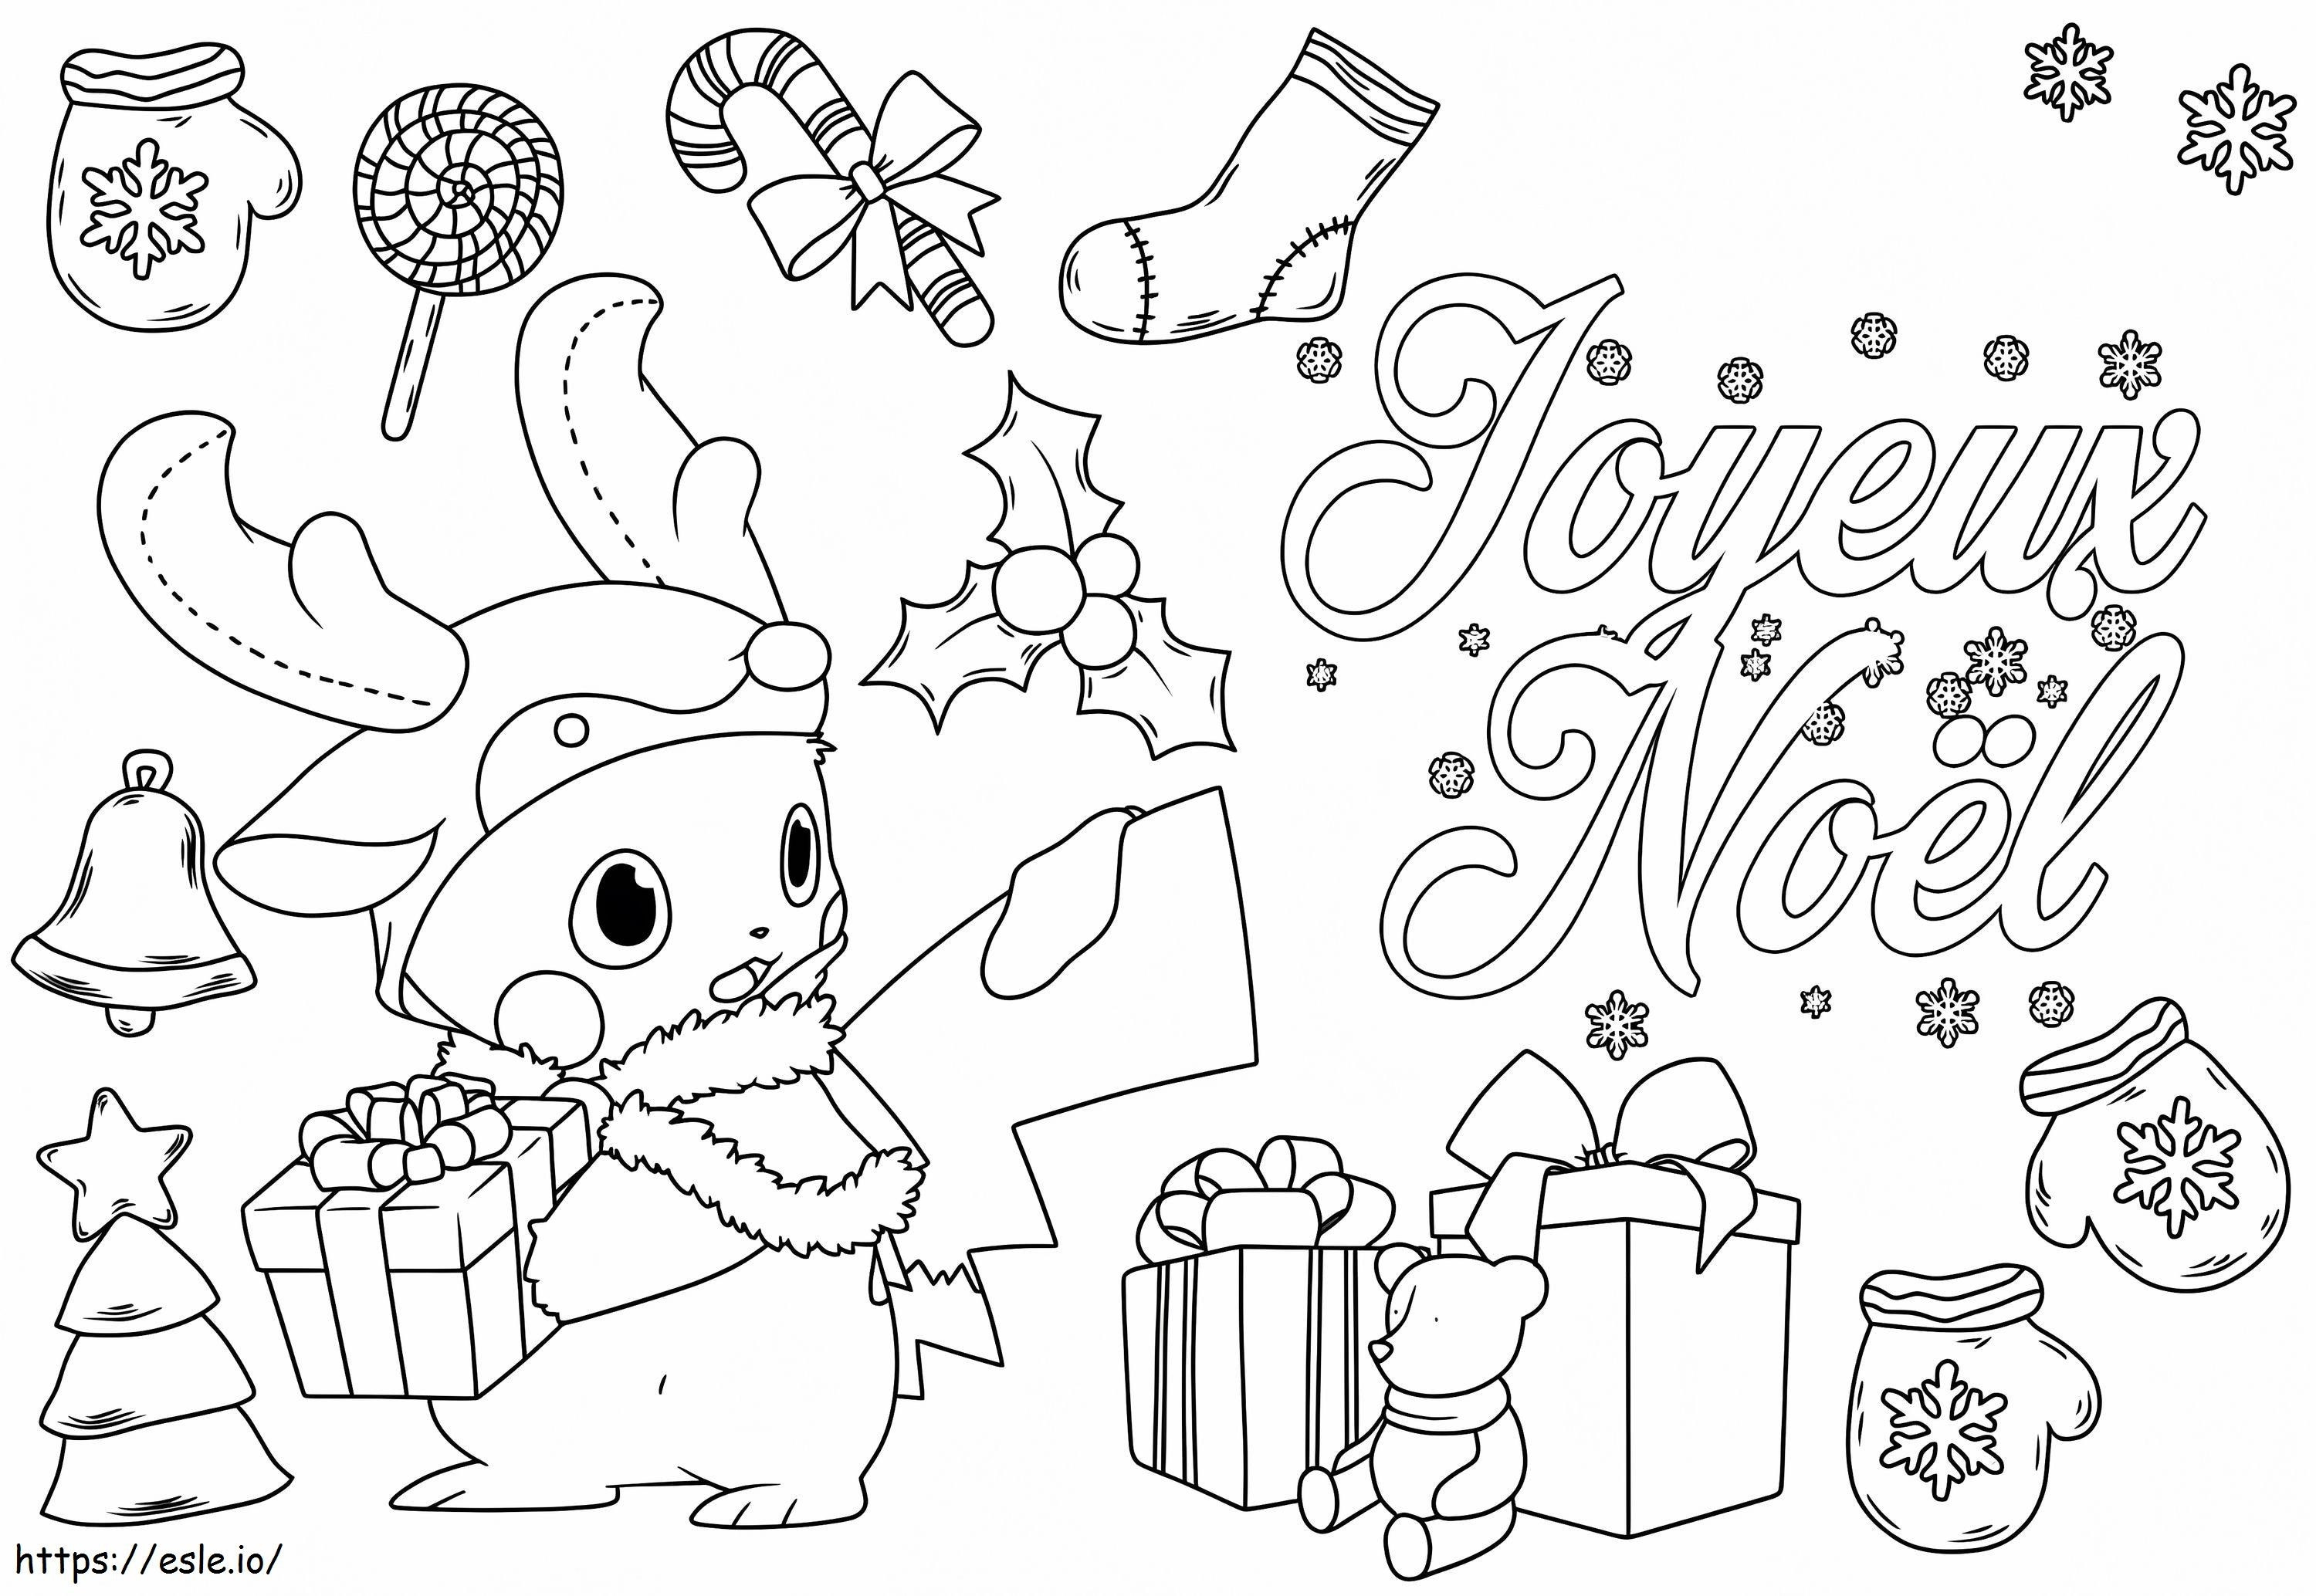 Merry Christmas With Pikachu coloring page